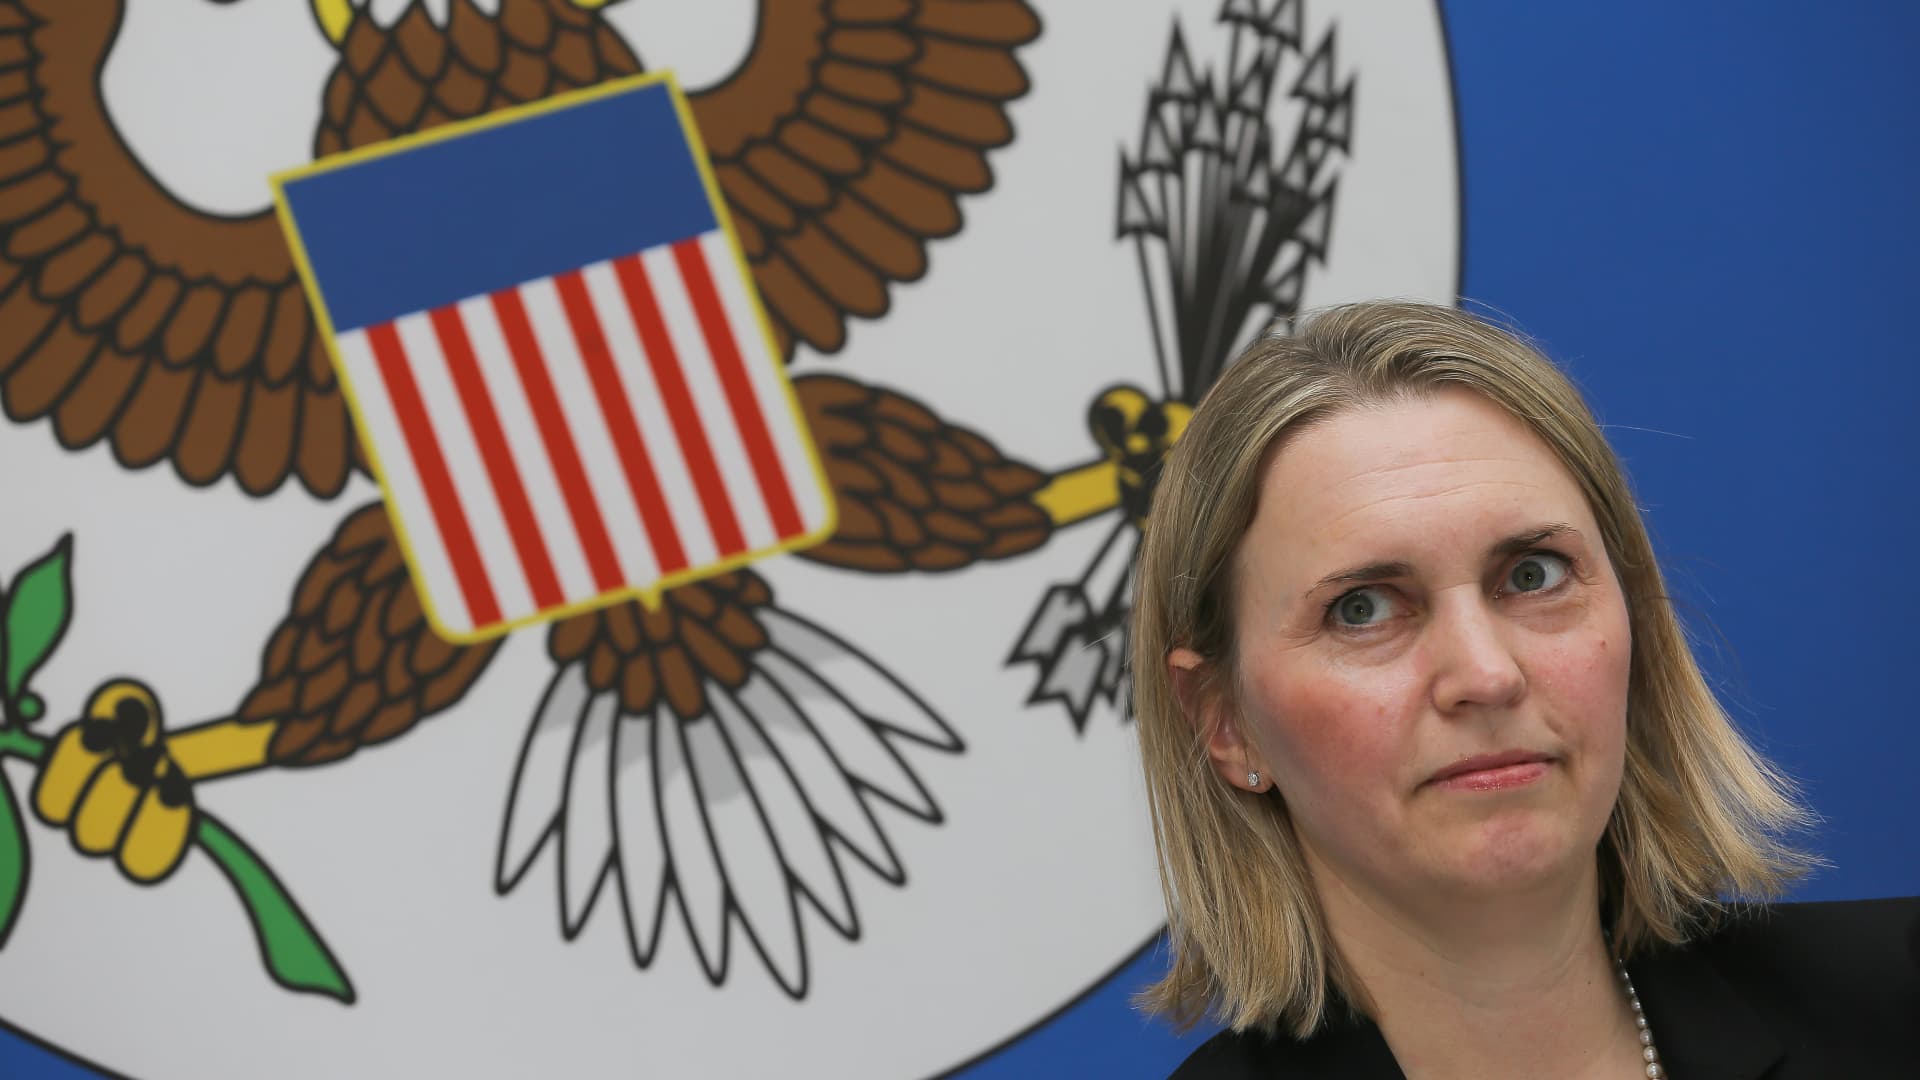 Deputy Assistant Secretary of State for European and Eurasian Affairs Bridget Brink at a press conference.